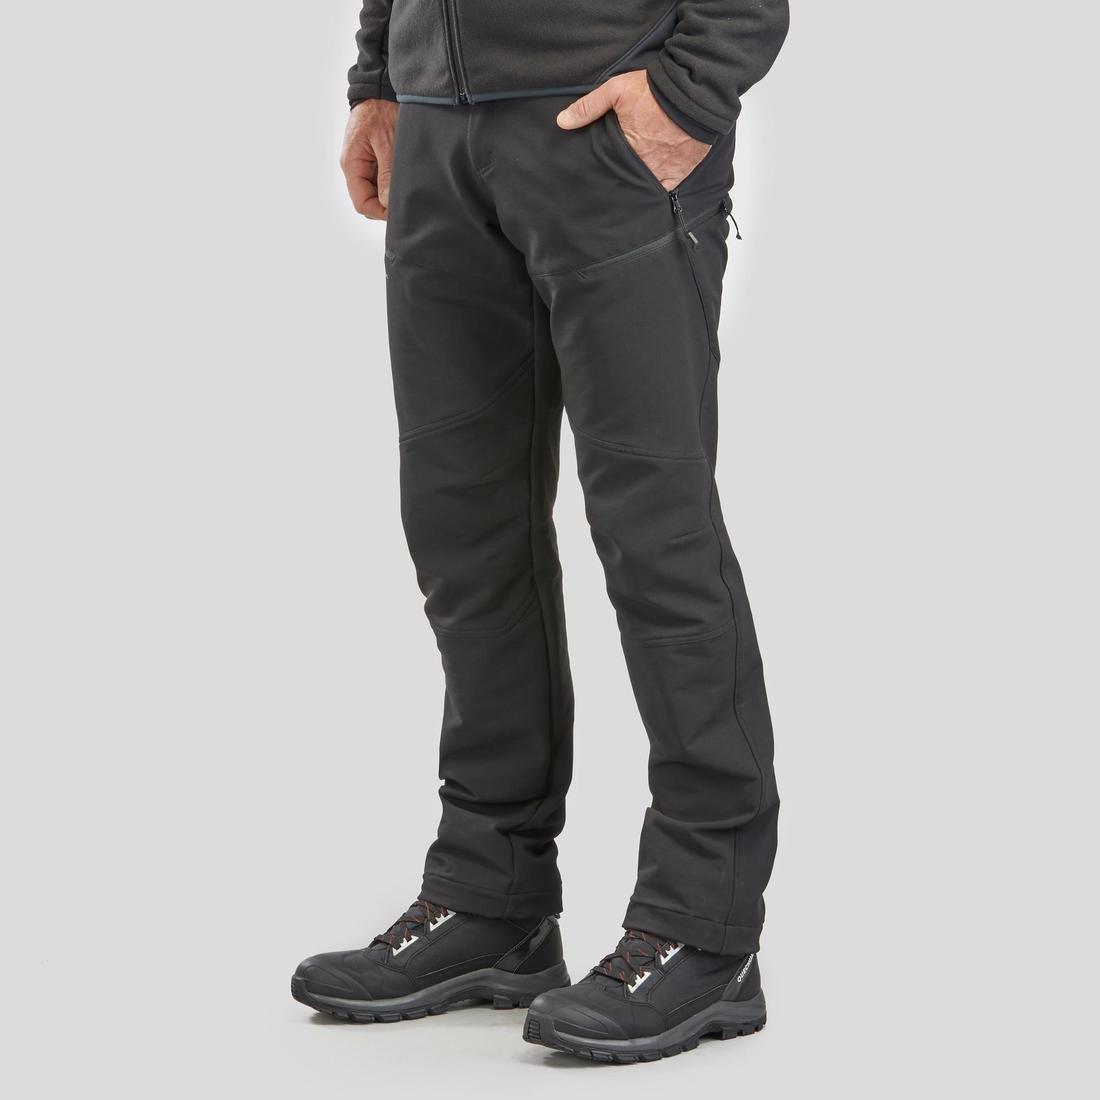 Men's Warm Water-repellent Snow Hiking Trousers - SH900 MOUNTAIN QUECHUA